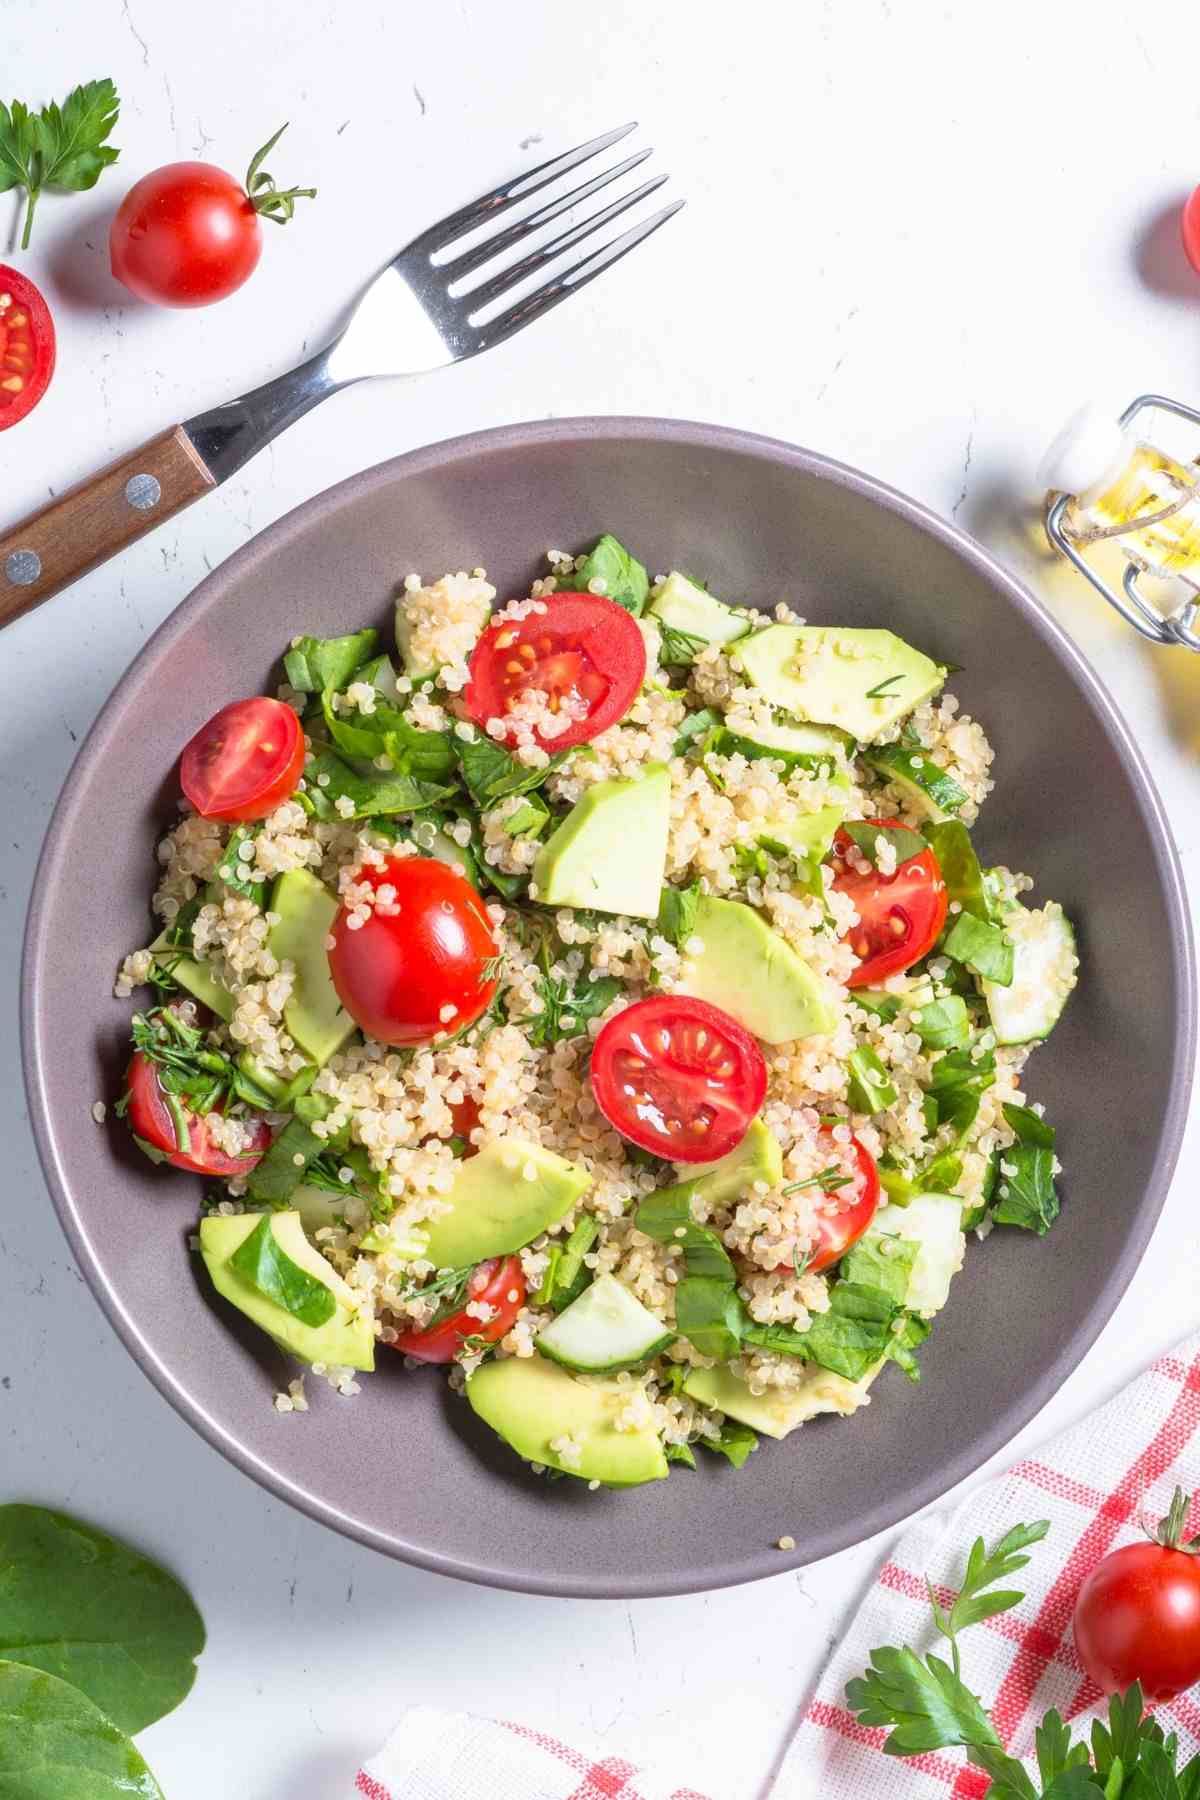 Refreshing, crisp, and delicious, this guacamole quinoa salad is a must-try! Not only is it vegan and dairy-free, but it's also gluten- and nut-free, making it the ideal salad to take along to your next potluck!